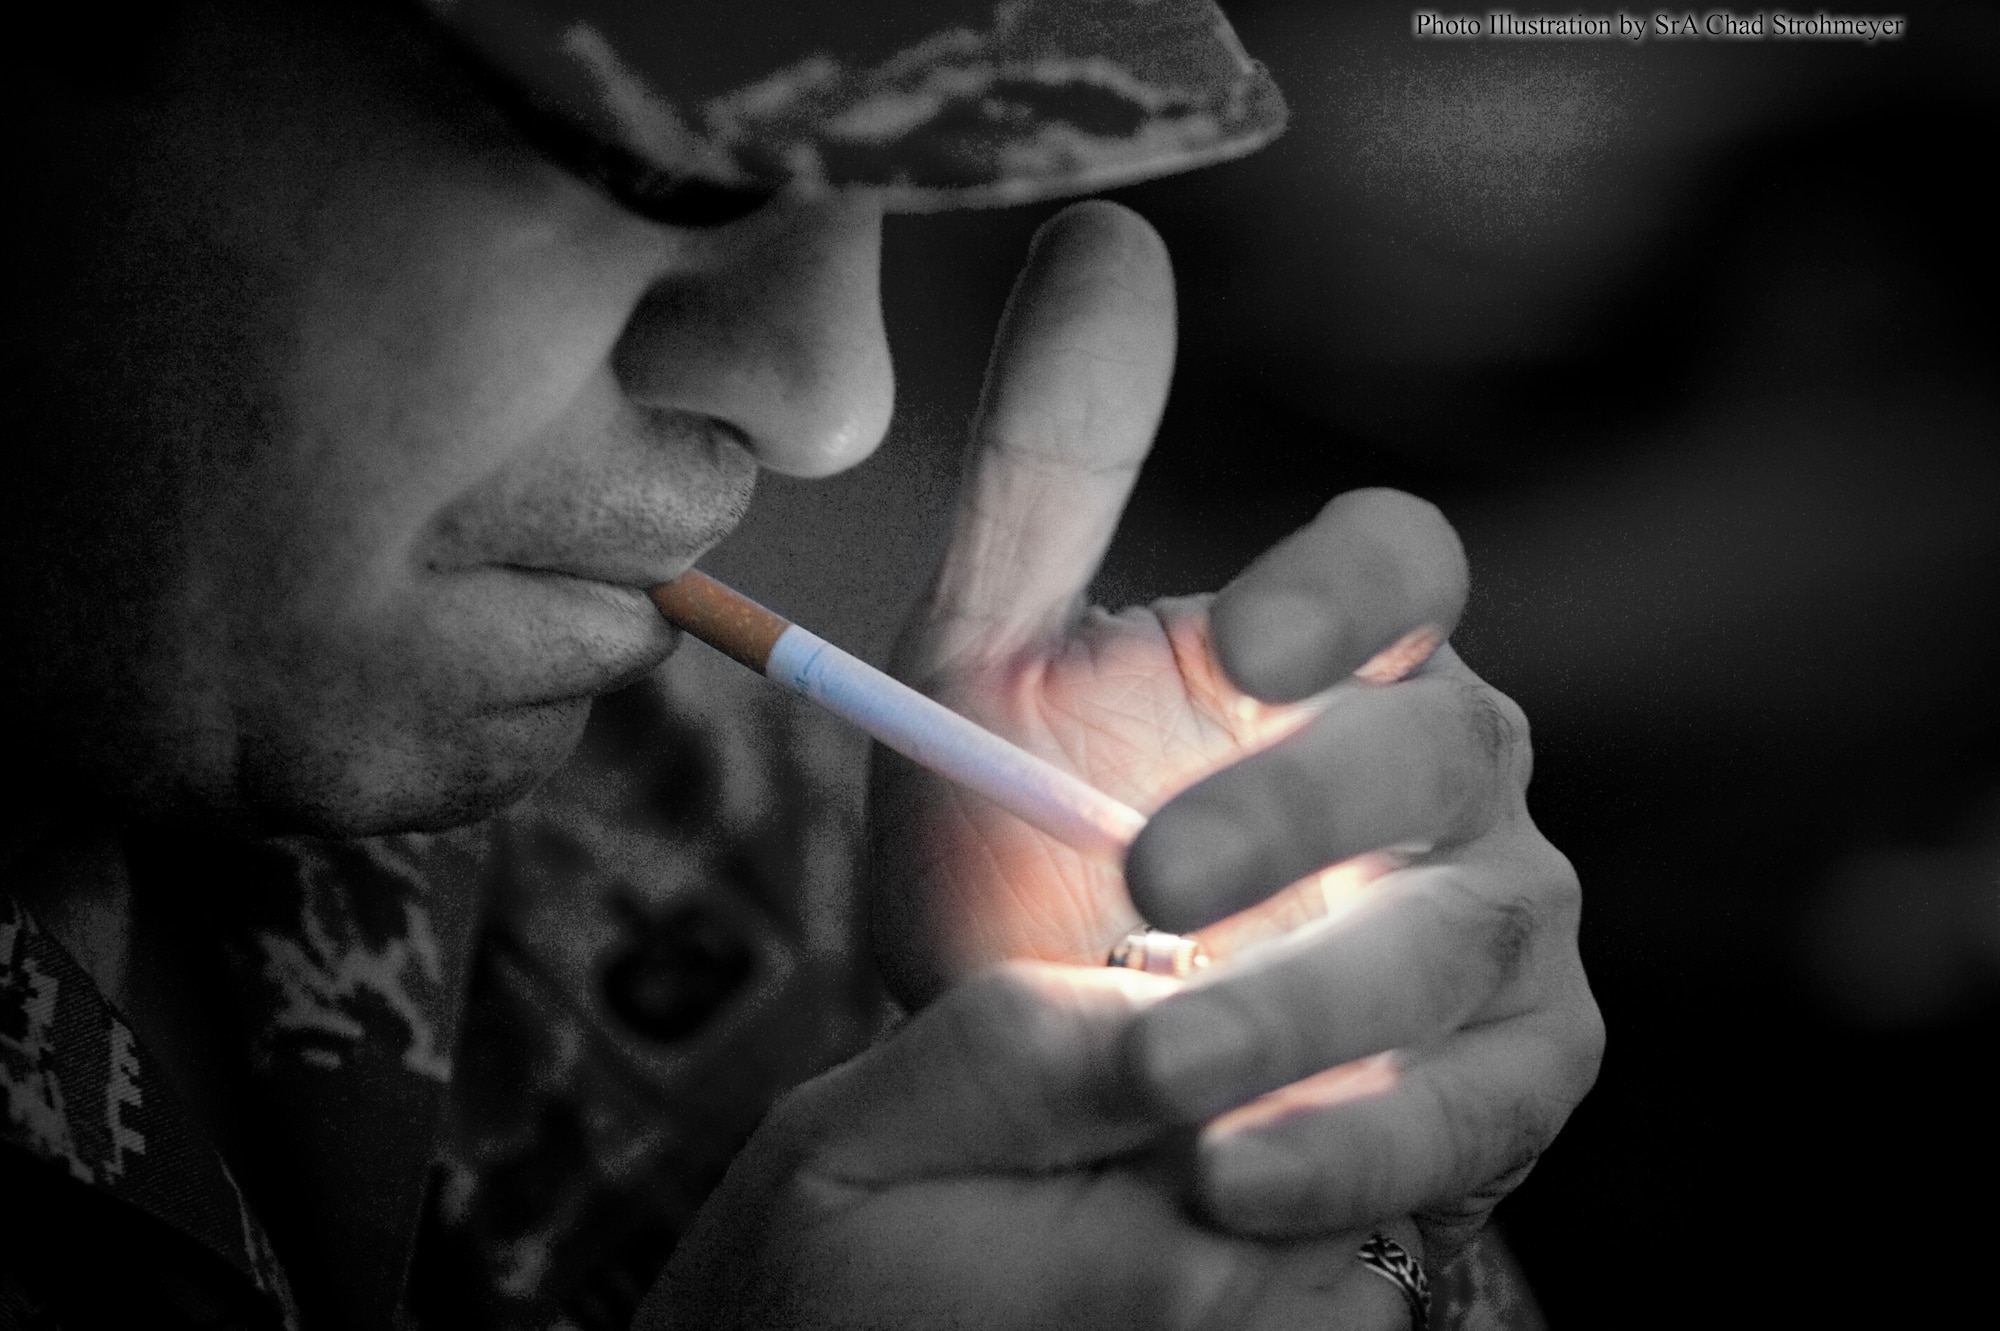 Effective May 1, 2009, smoking is prohibited in dorms and tower housing on Misawa Air Base. (U.S. Air Force photo illustration by Senior Airman Chad Strohmeyer)